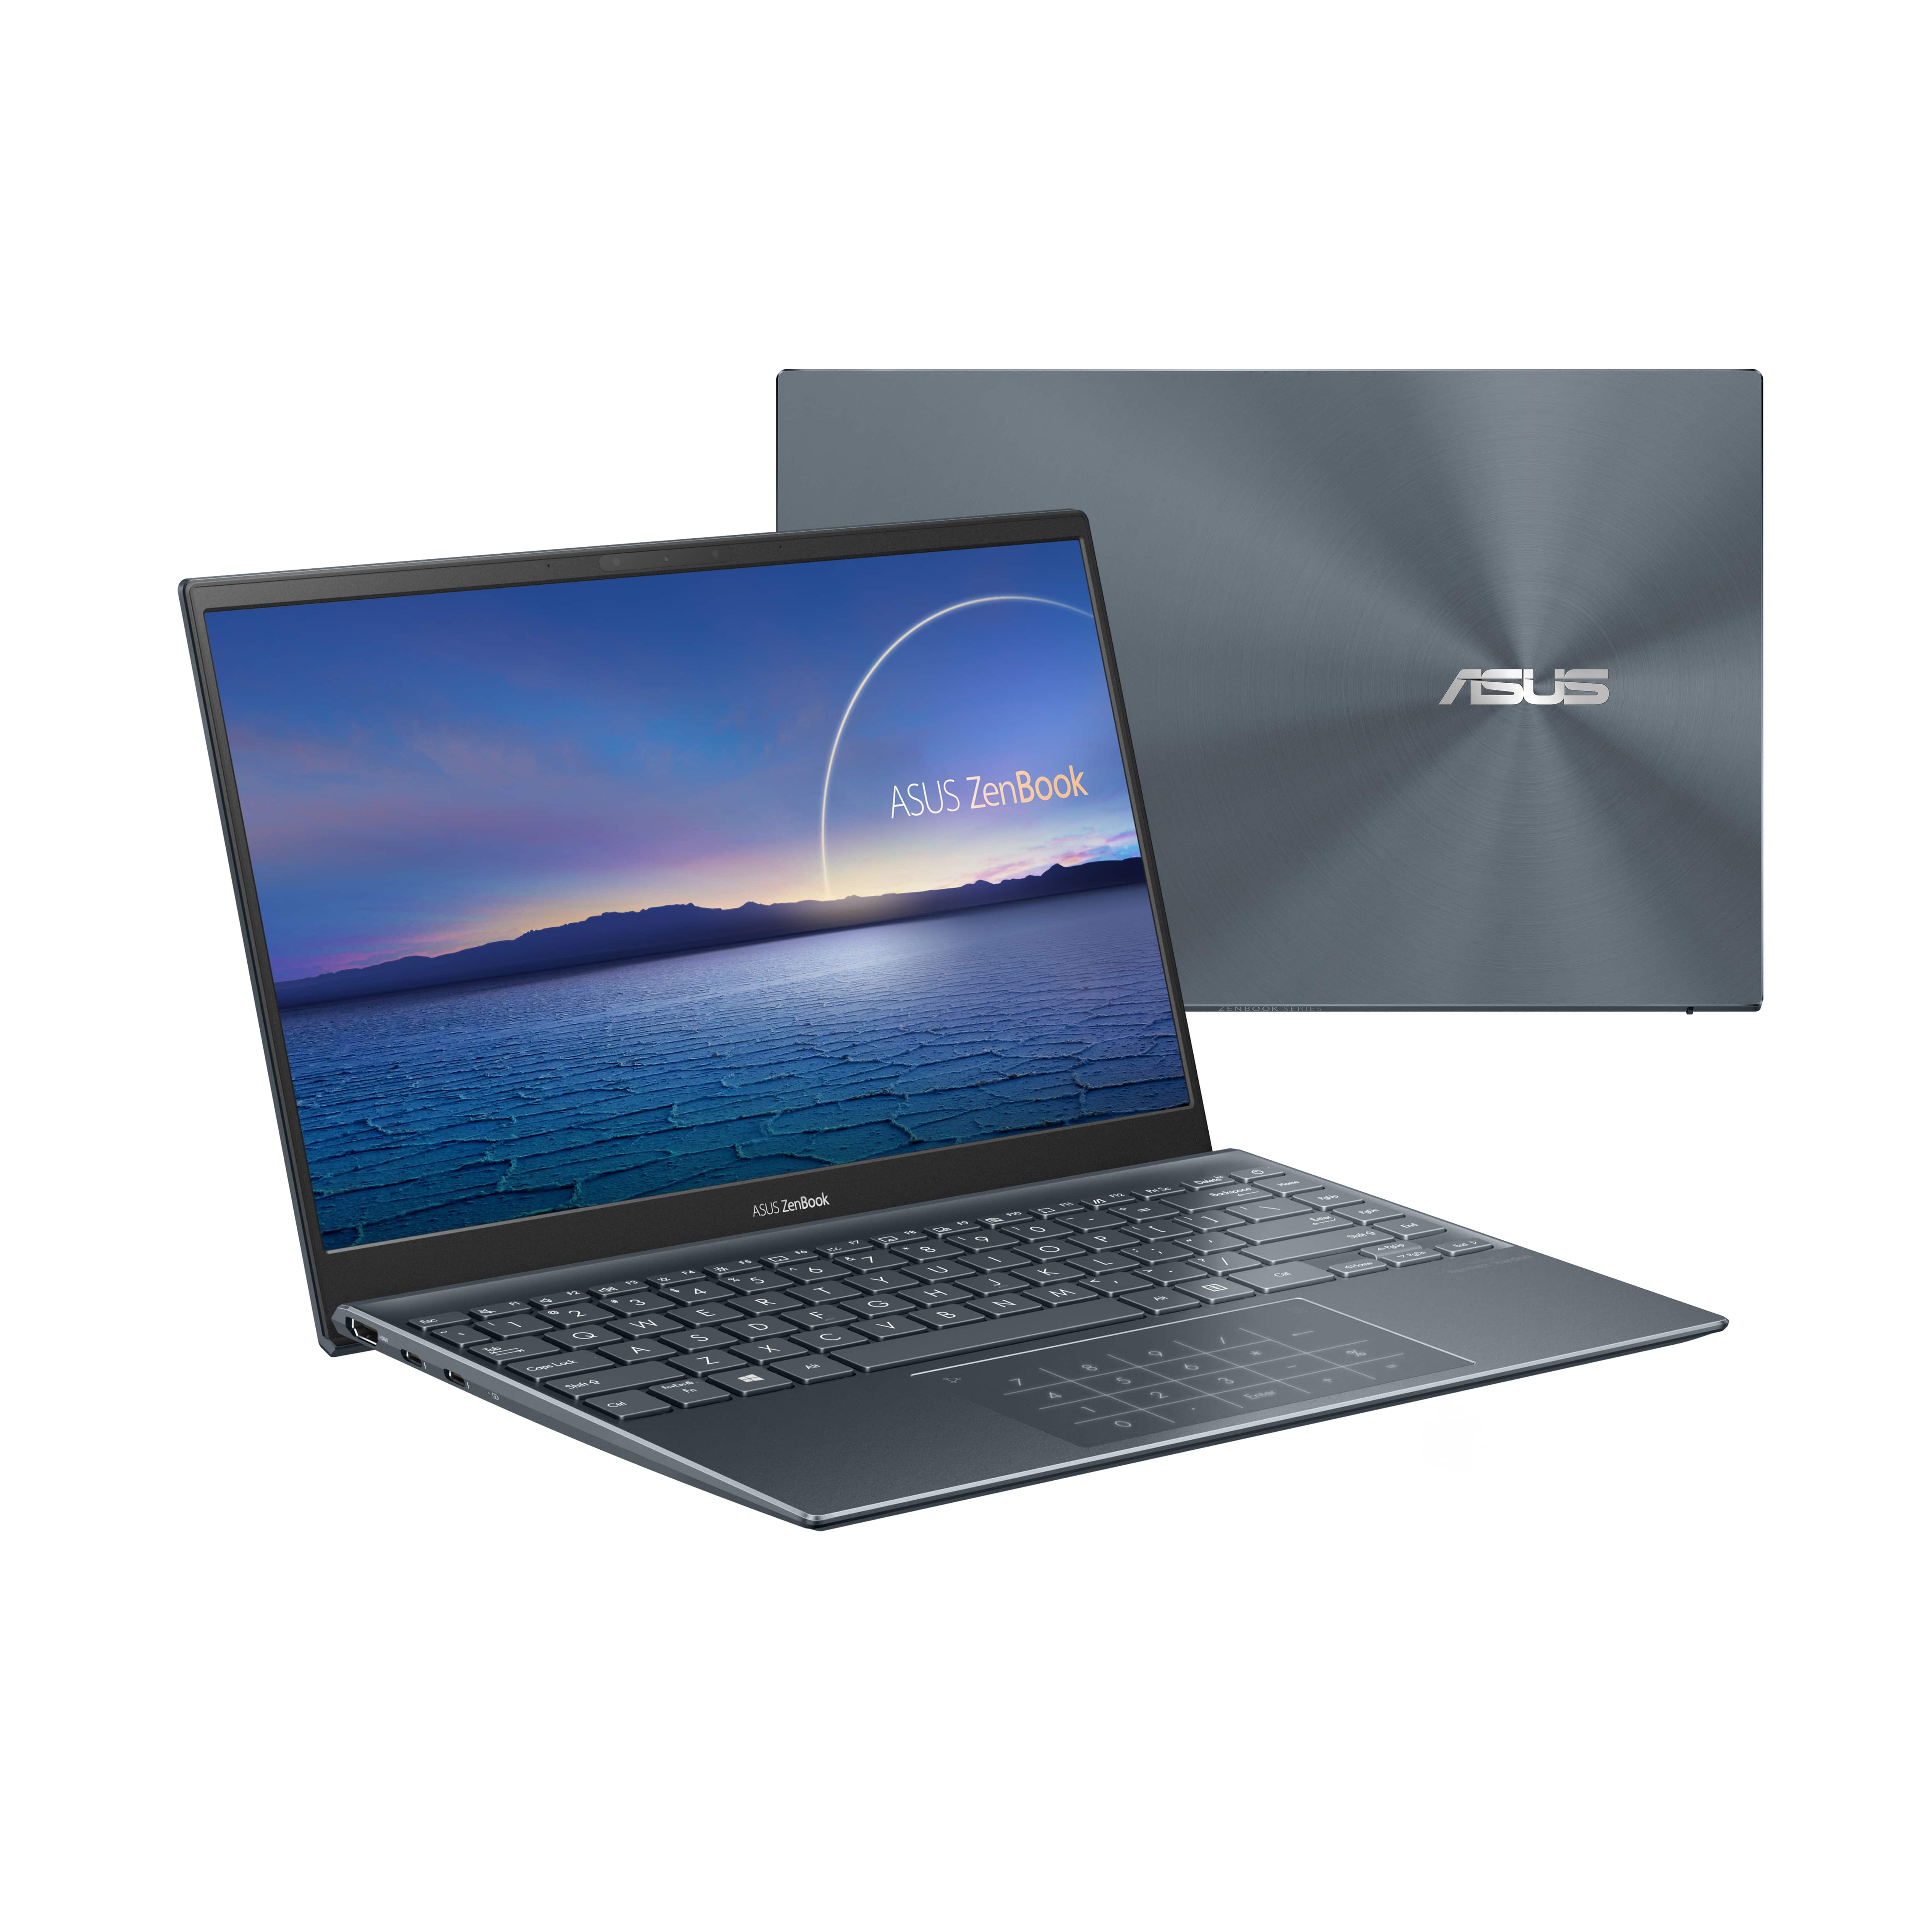 Asus launches new ZenBook, VivoBook models in India: Check